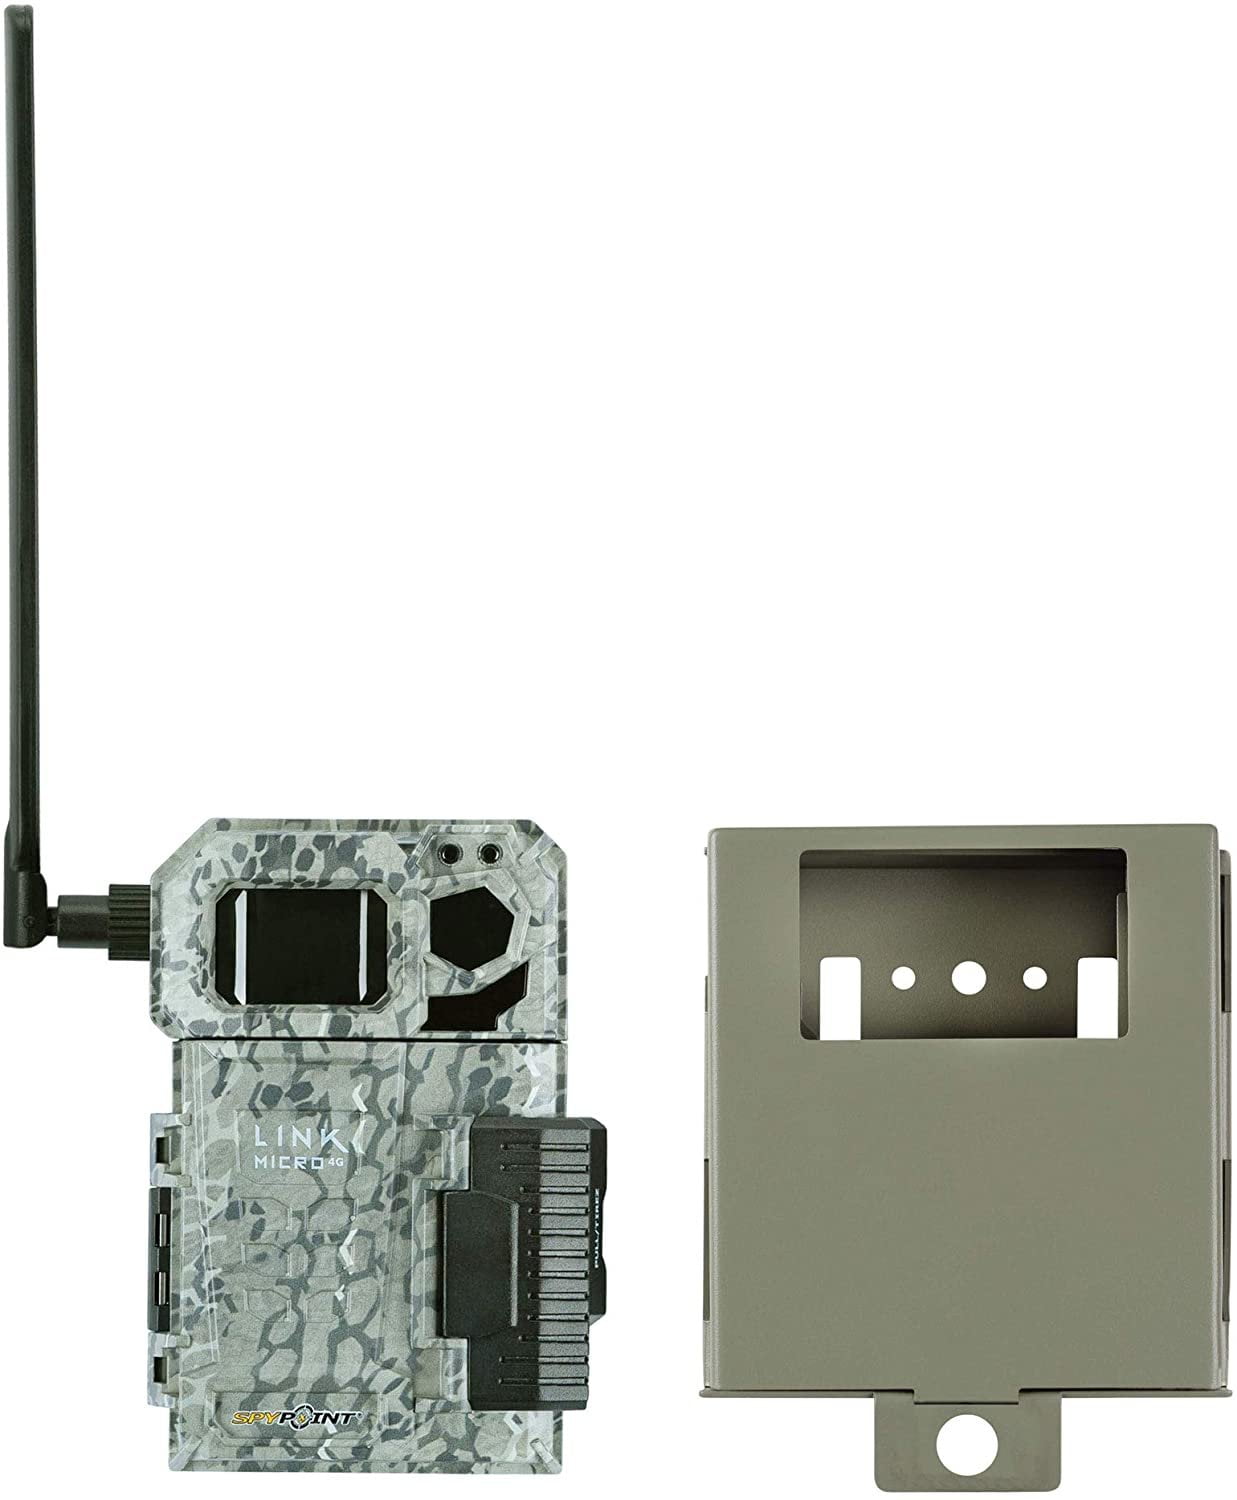 4G Antenna For Spypoint Ultra Compact Cellular Trail Game Camera,AT&T LINK-MICRO 